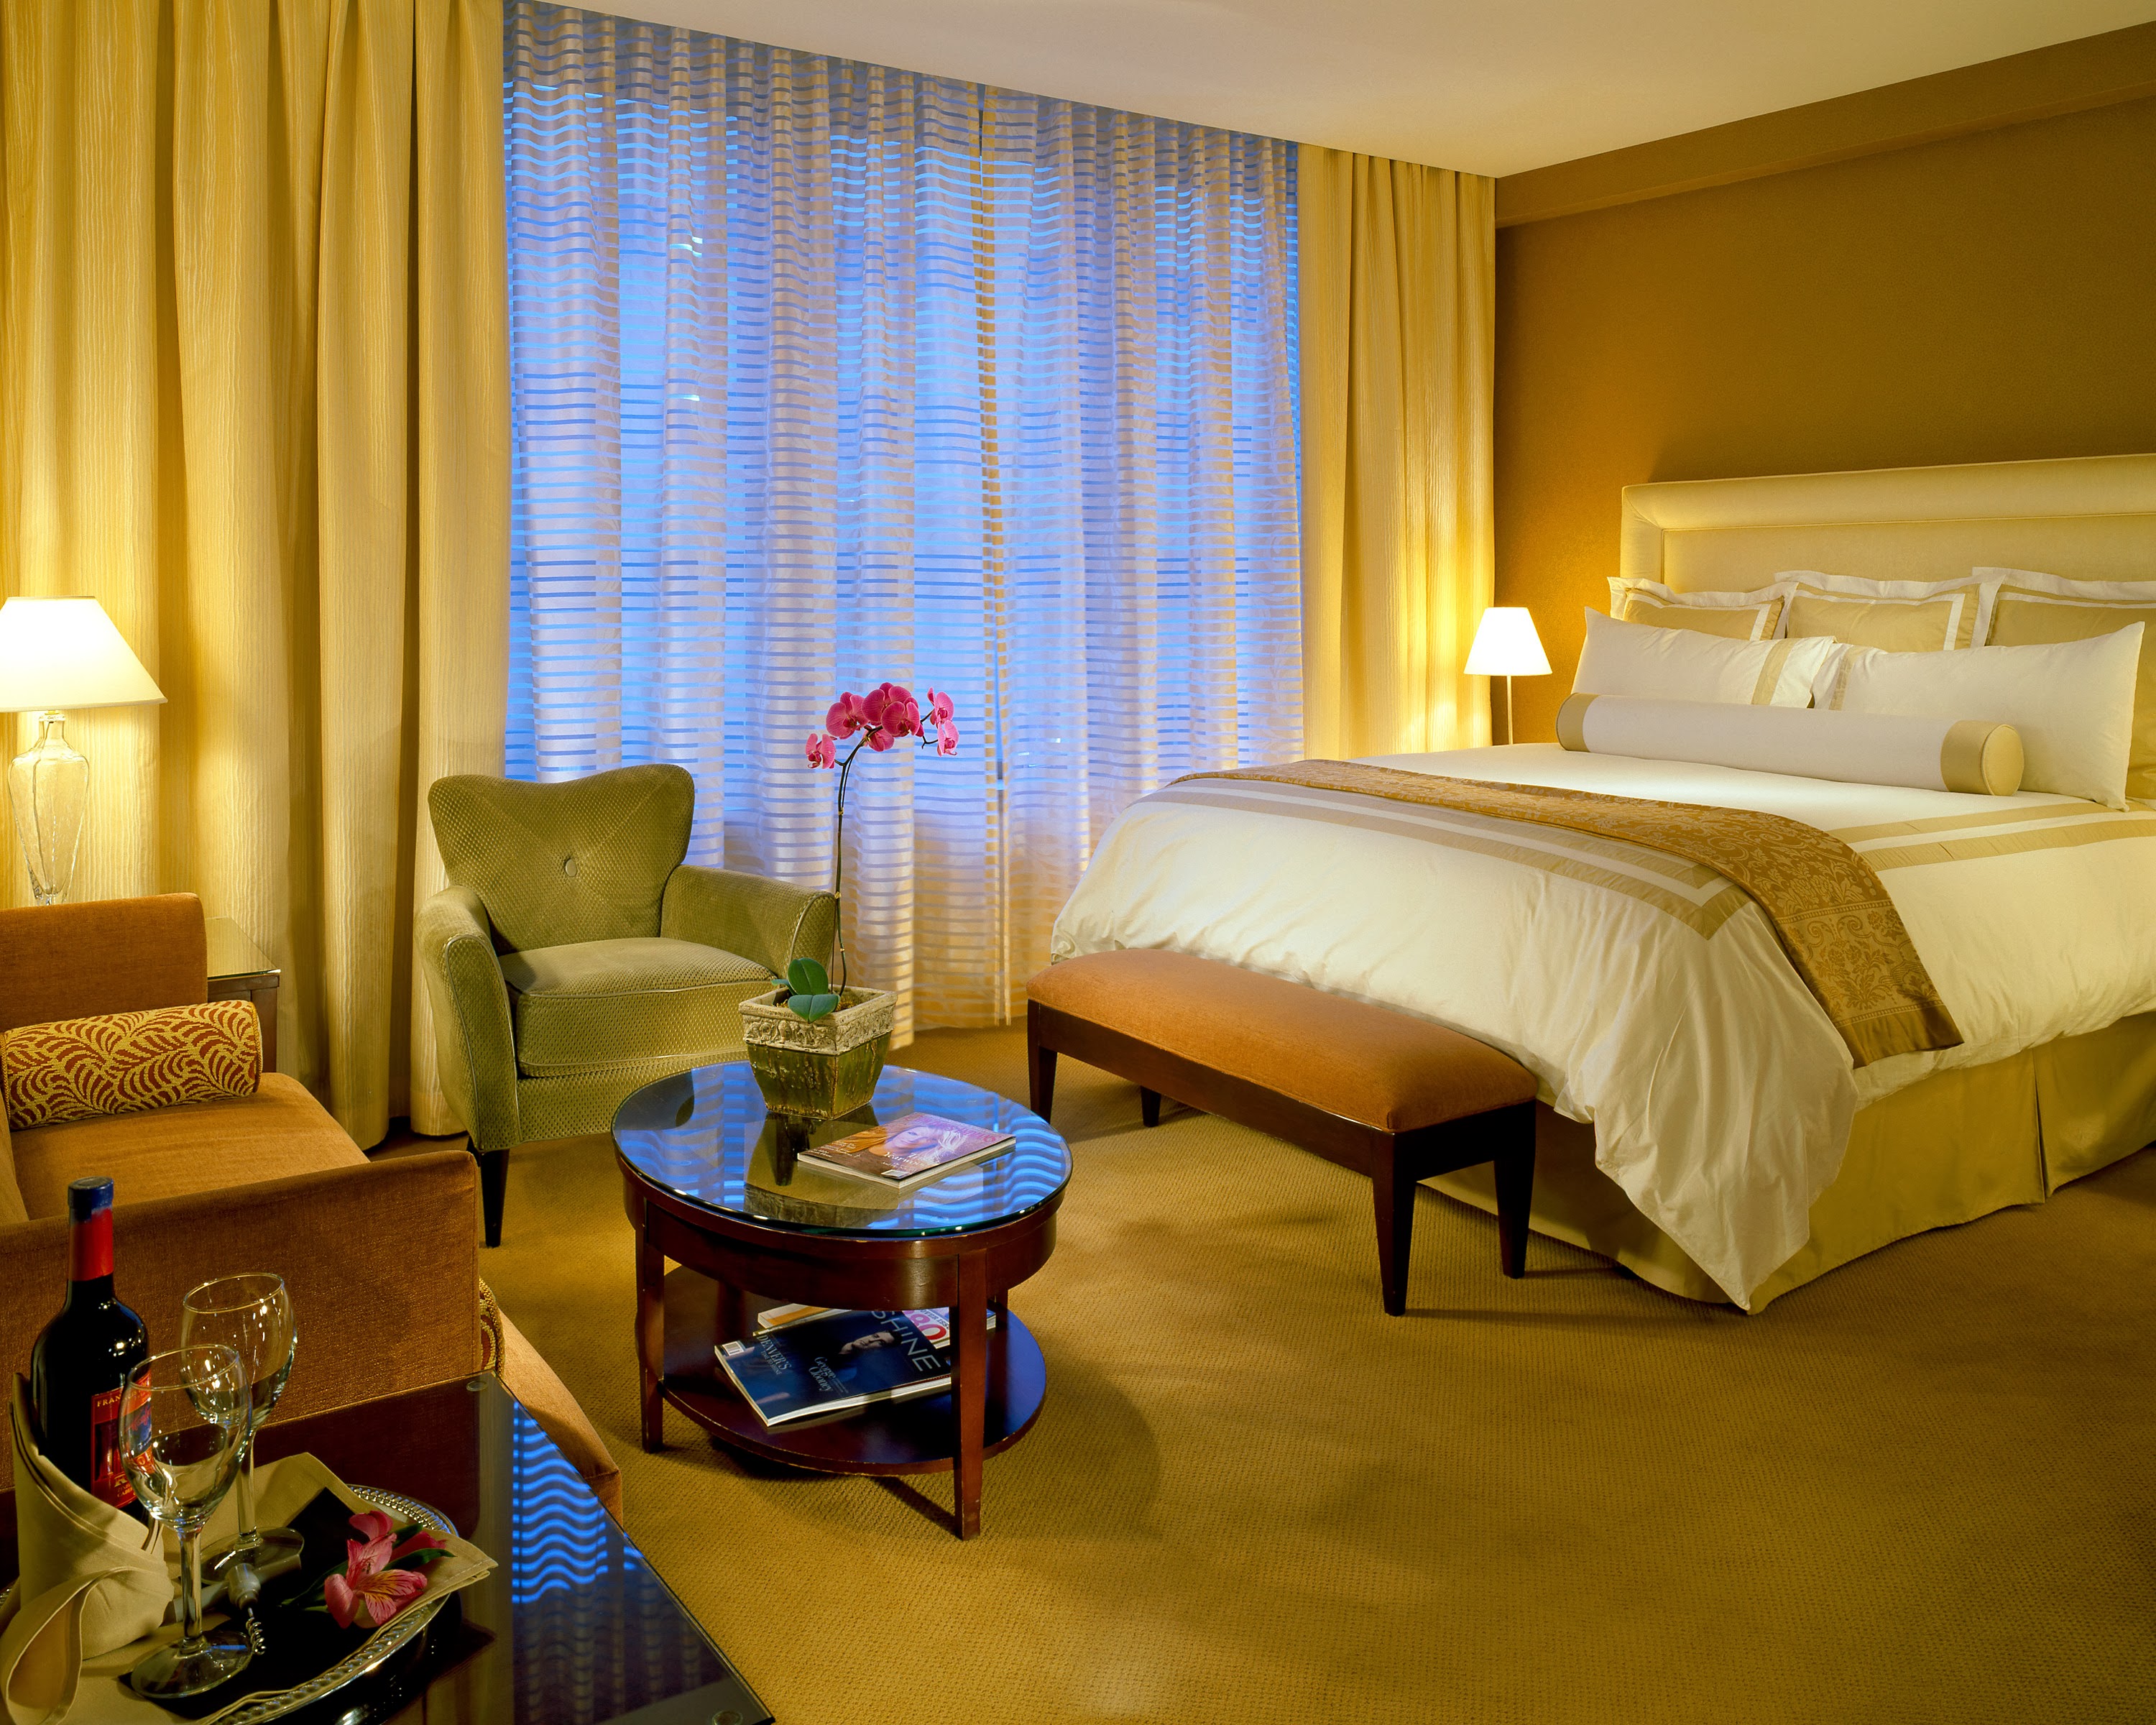 Hotel Teatro is an ideally-located Denver Hotel near top dining, attractions, and Denver Events.